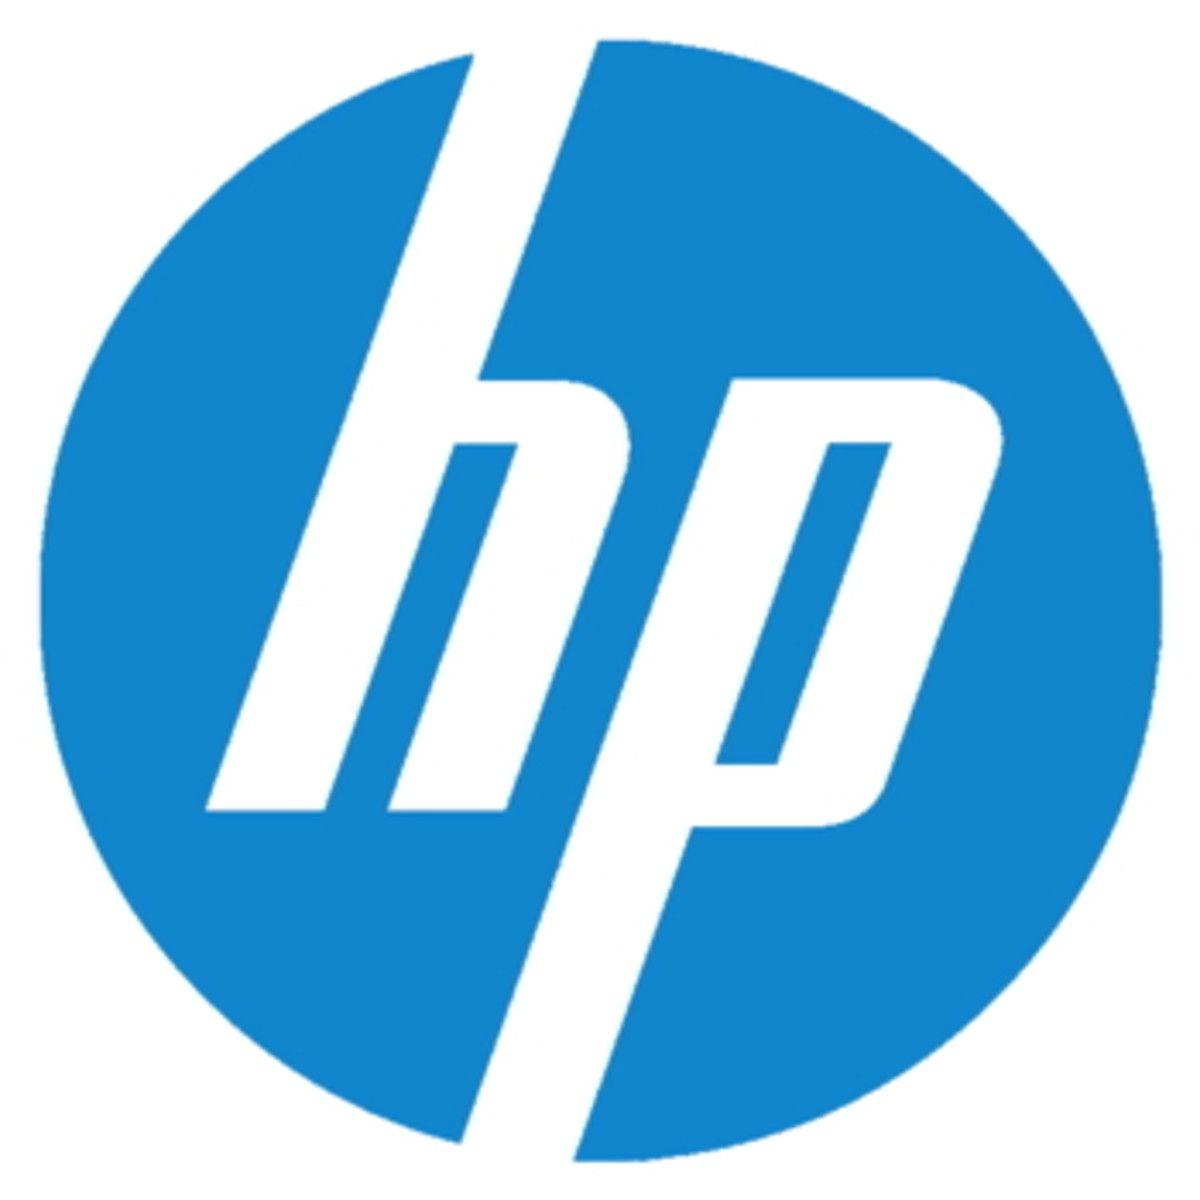 Clear HP Logo - HP CEO: 'We have a clear strategy now' - PC Retail